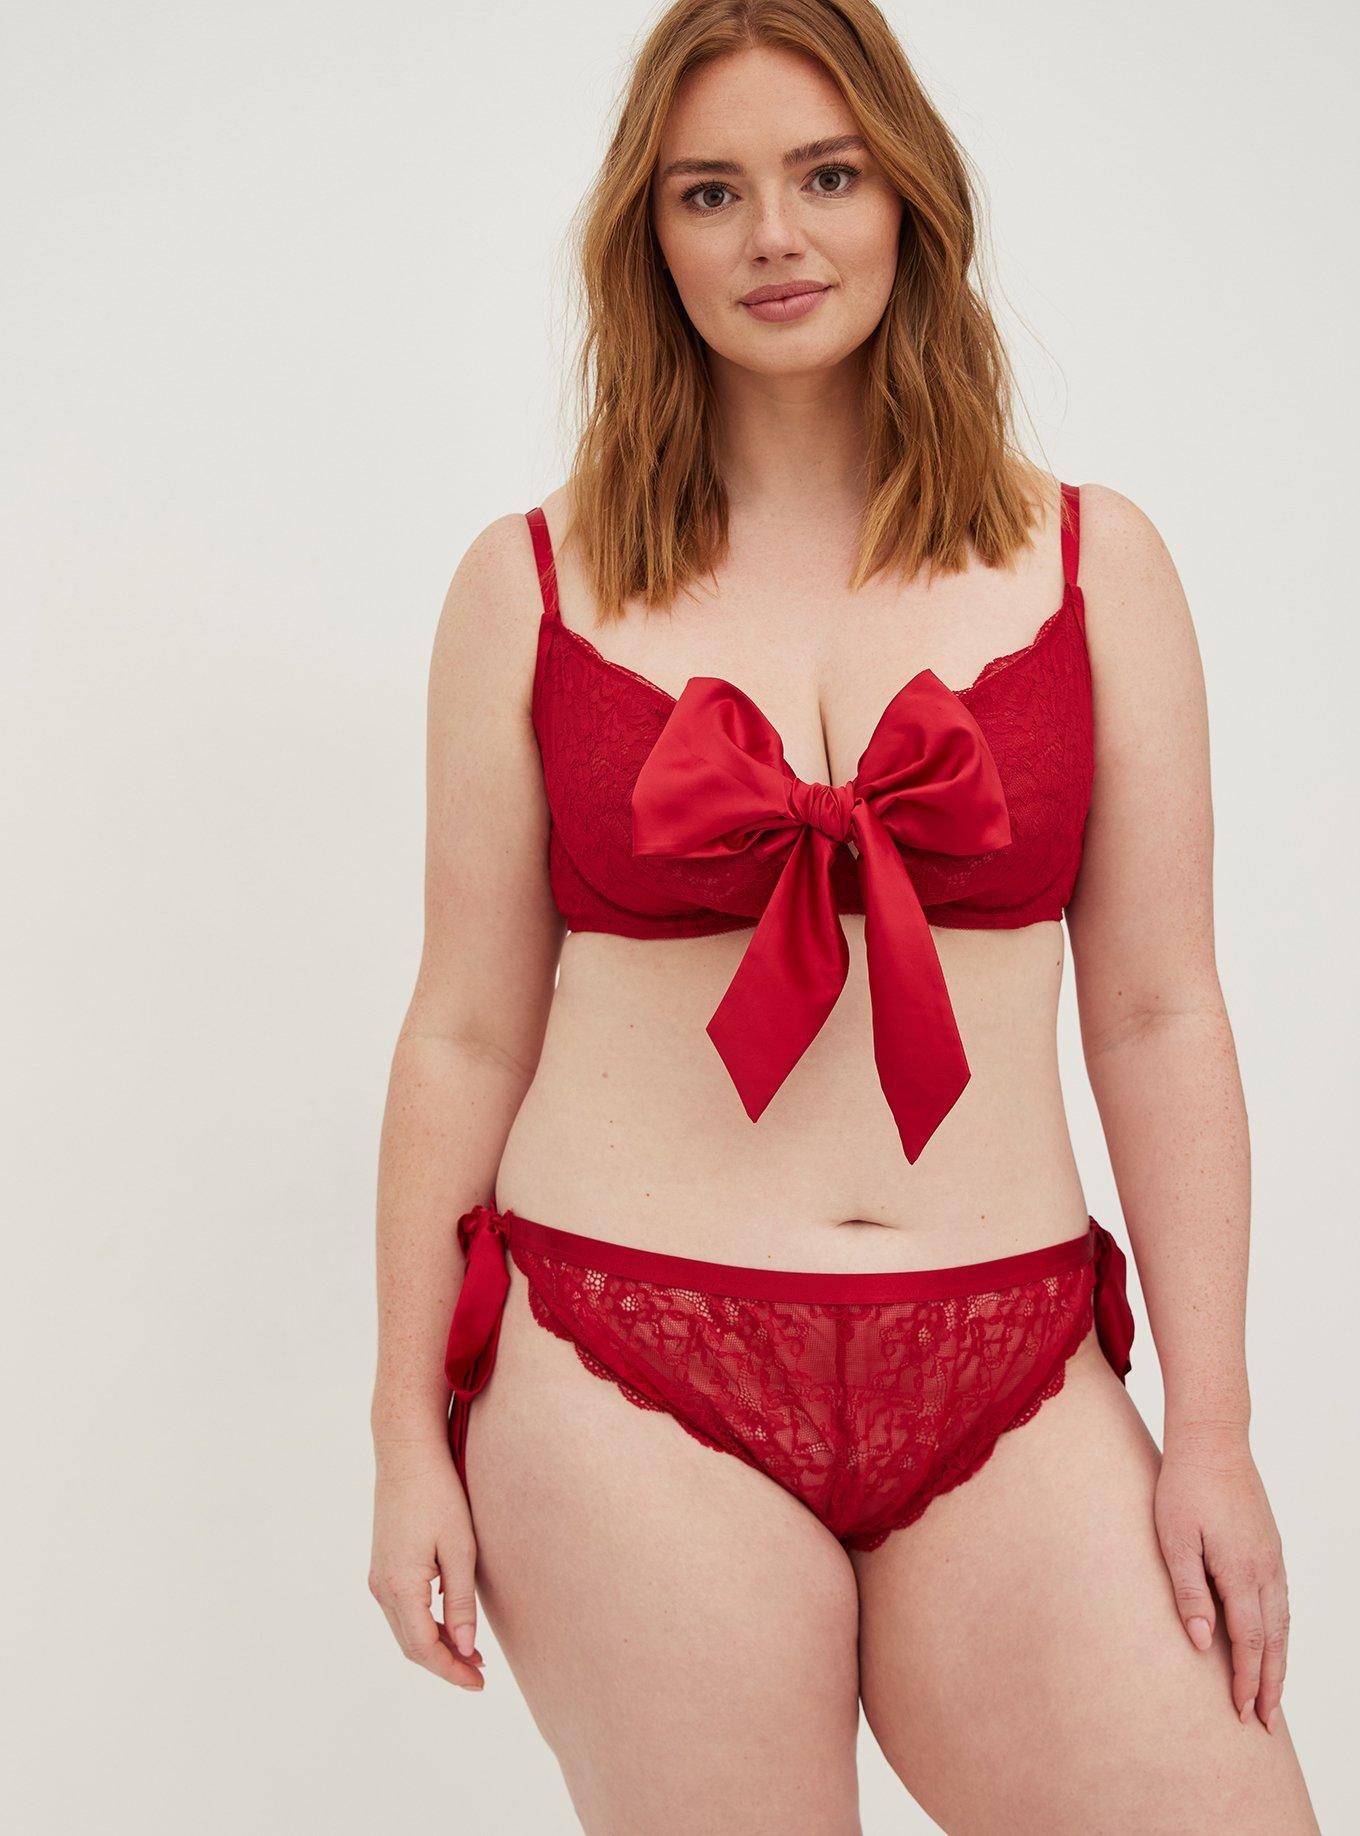 Torrid Red Lacey Tie Bow Unlined Bra NWT